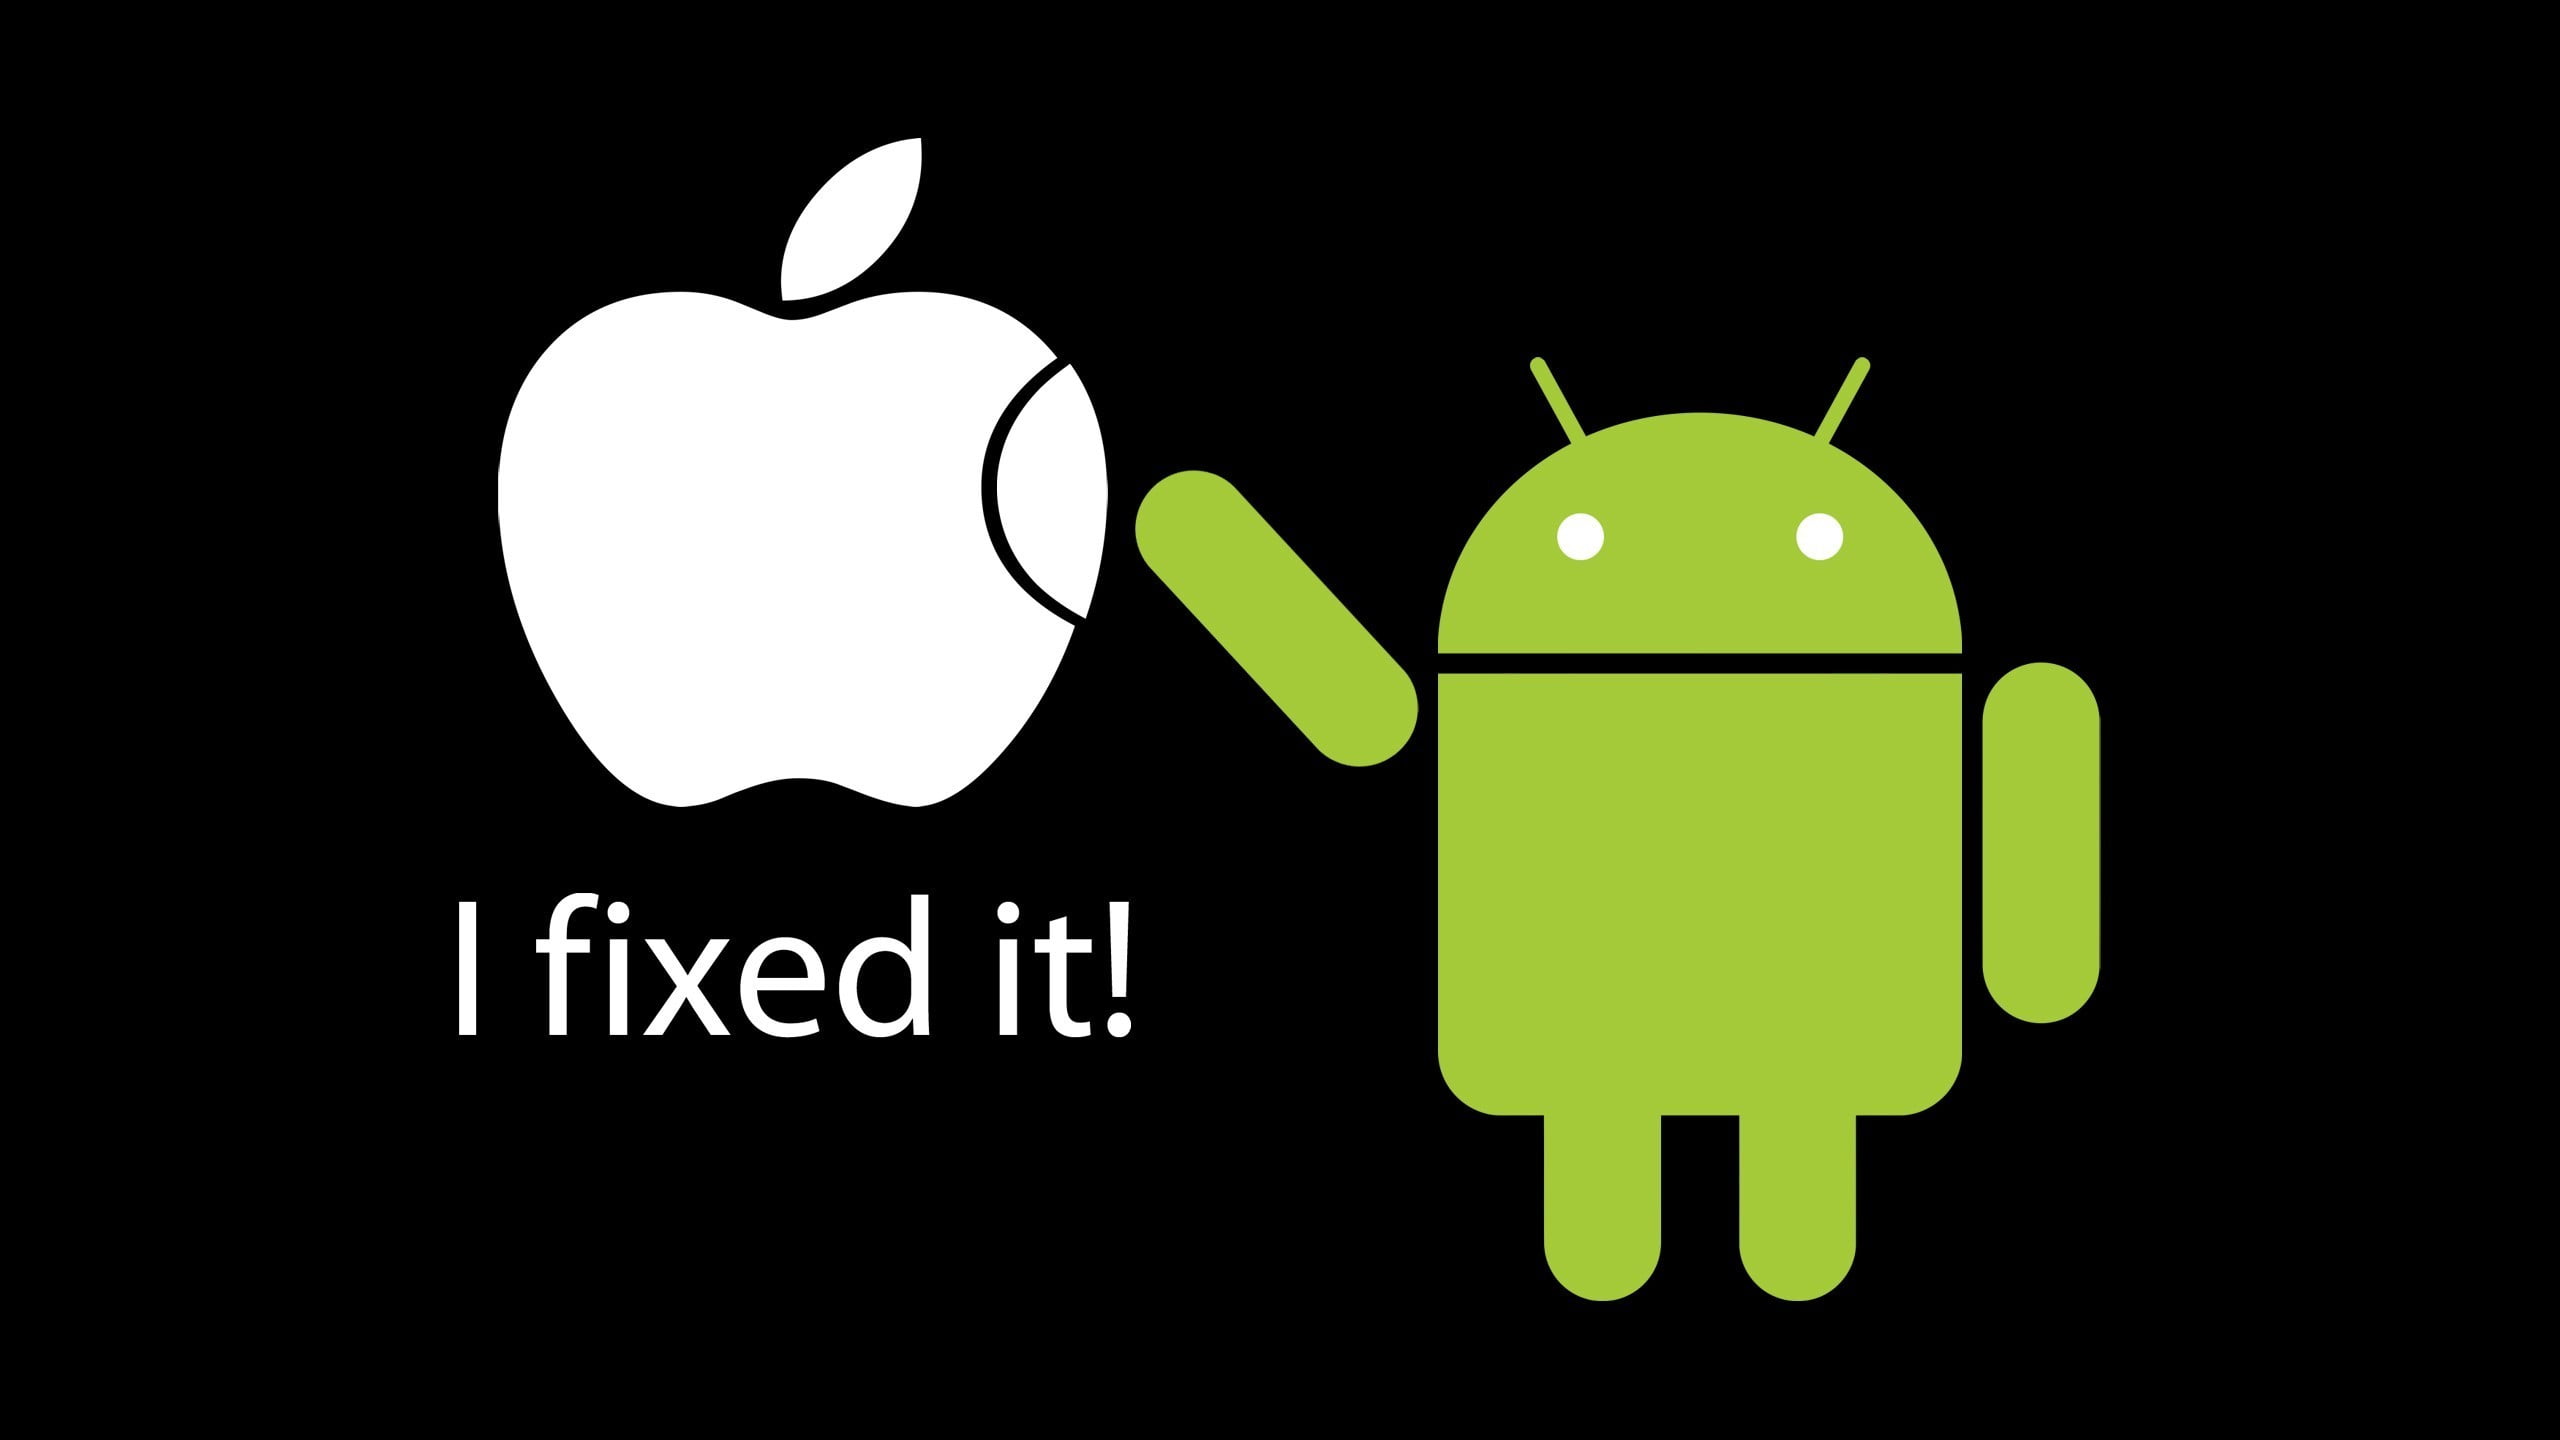 Apple logo and Android logo, Apple Inc., Android (operating system), black background, humor